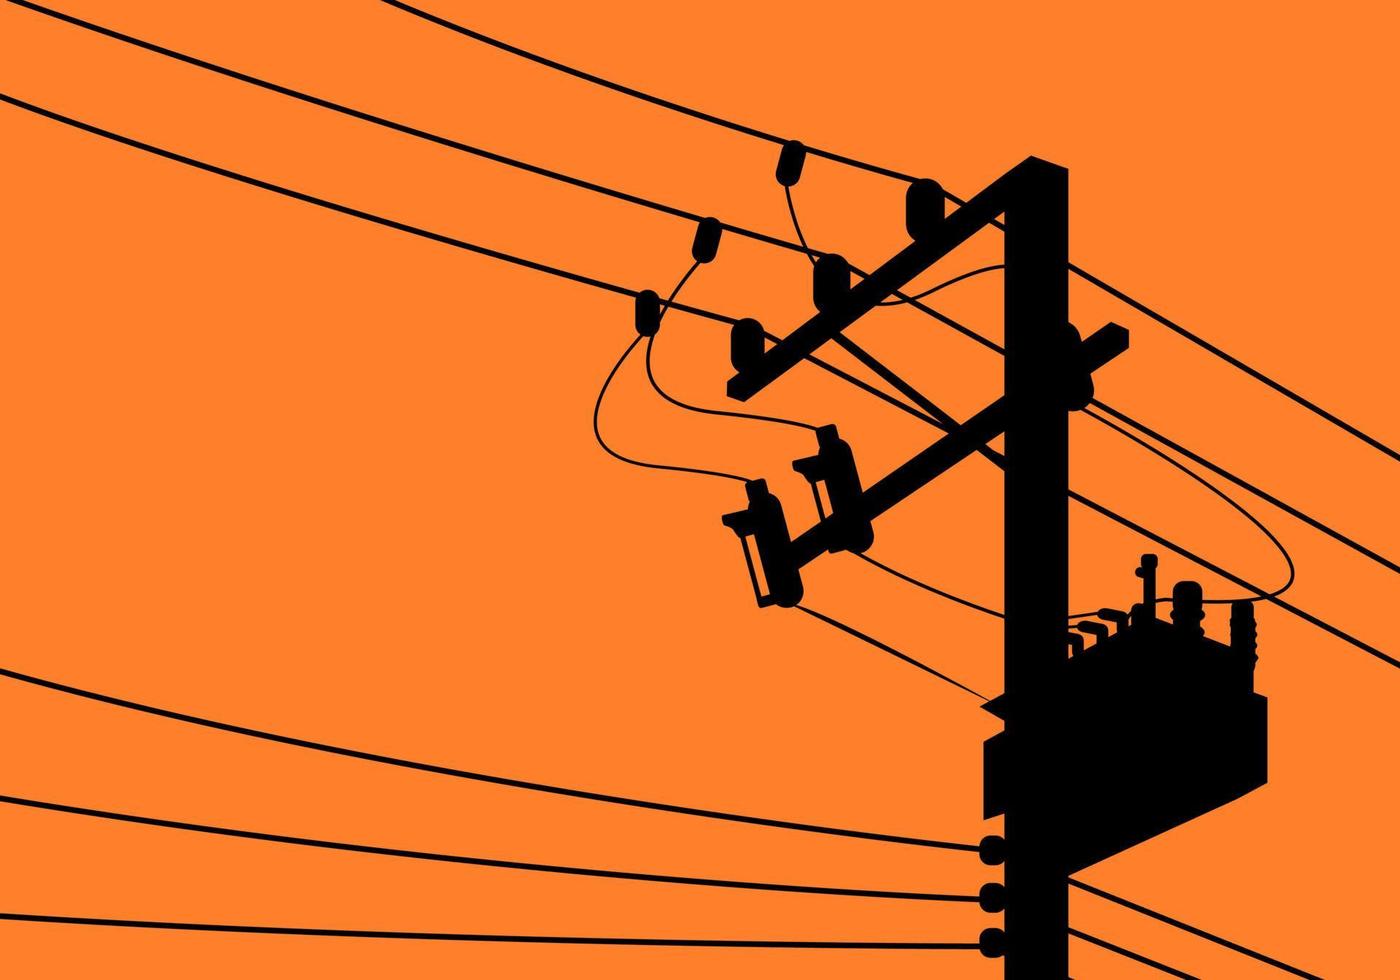 Silhouette high voltage electric pole with transformer and drop fuse on orange background flat vector design.